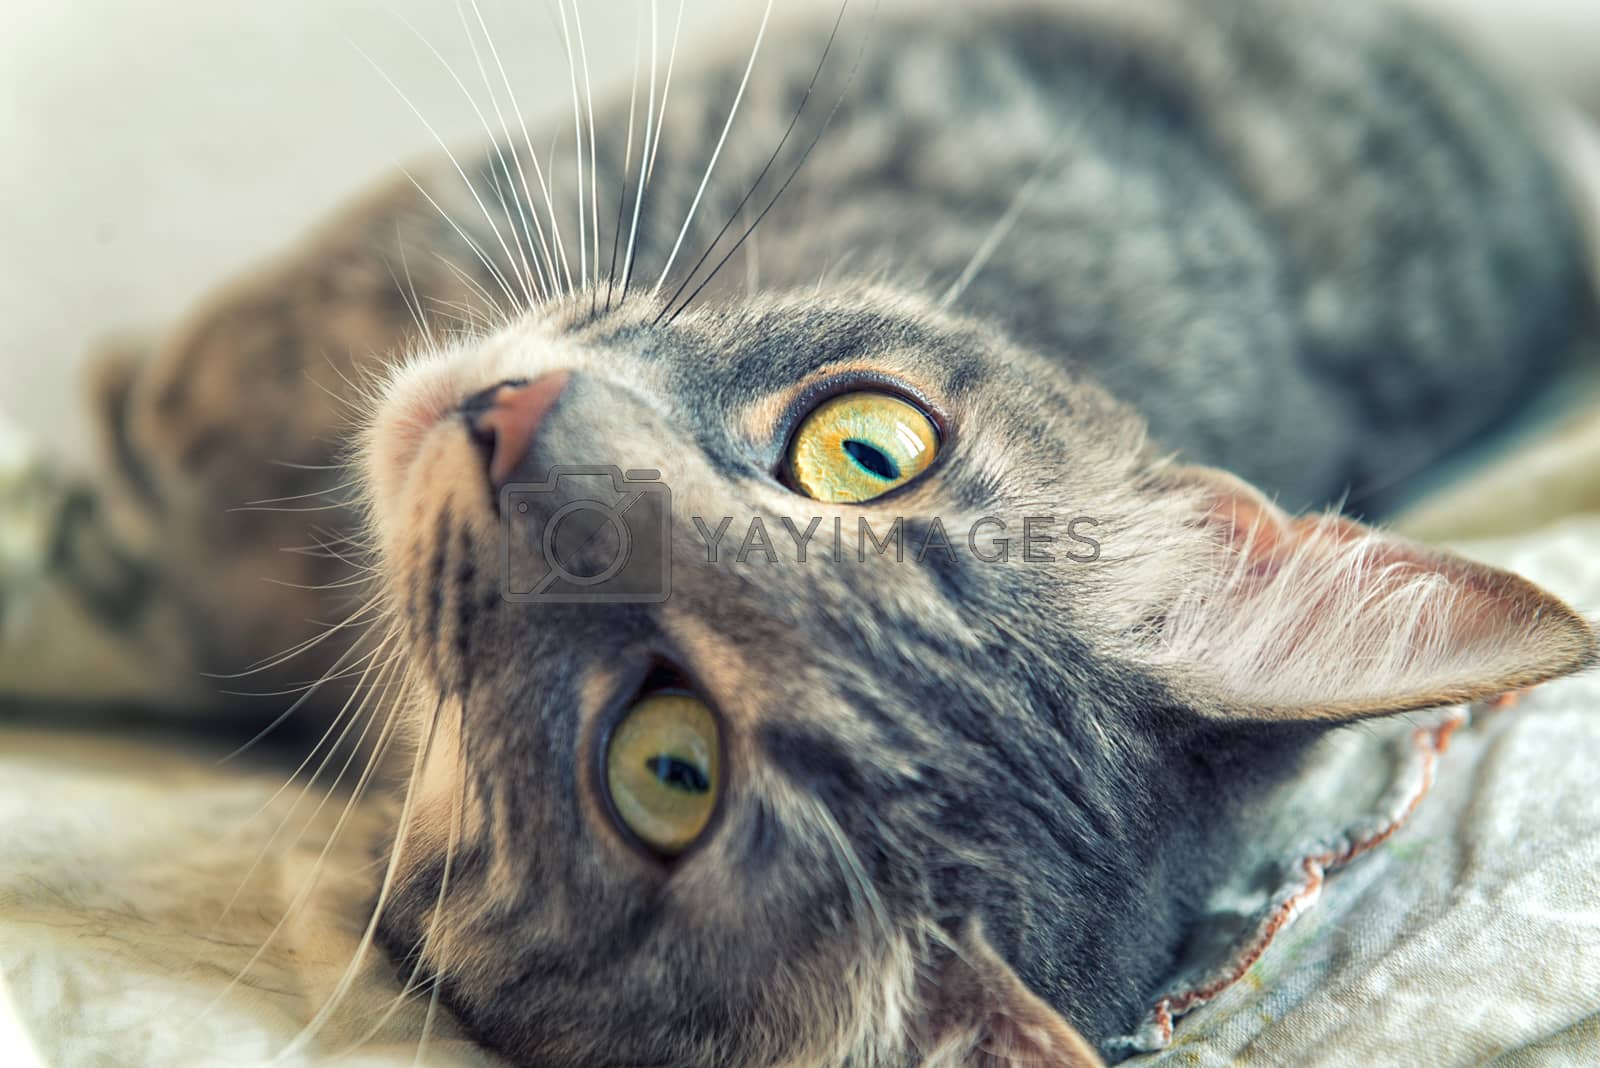 Royalty free image of Tabby cat relaxing by jordygraph